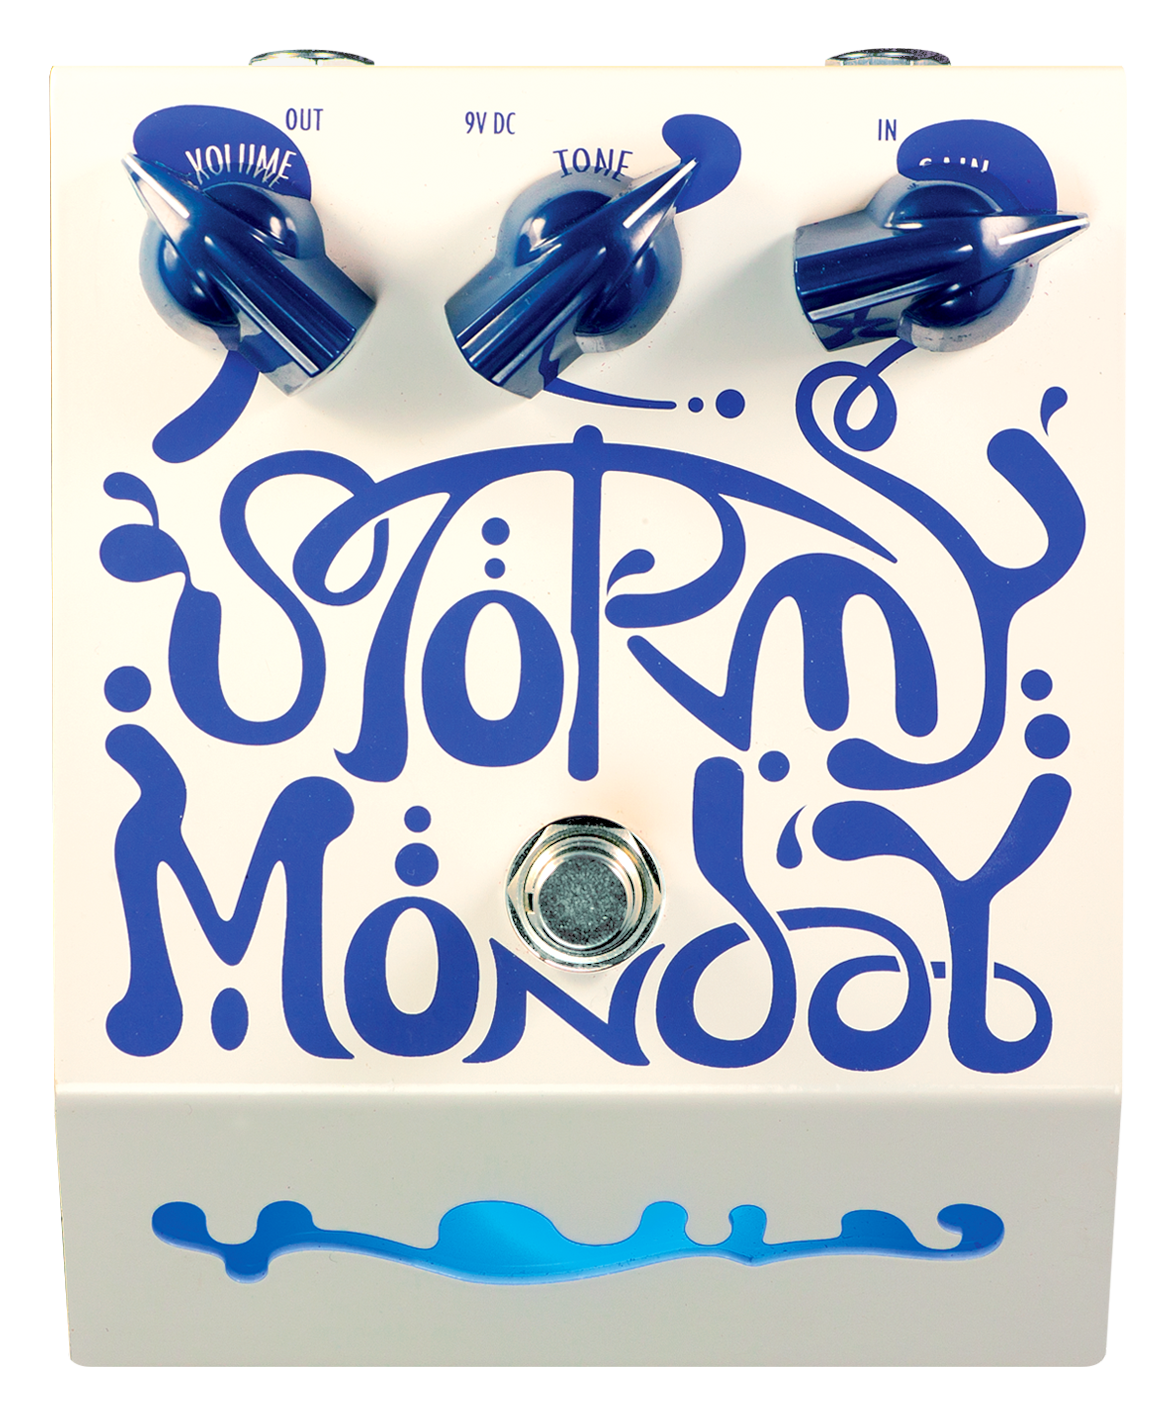 stormy_monday_site.png